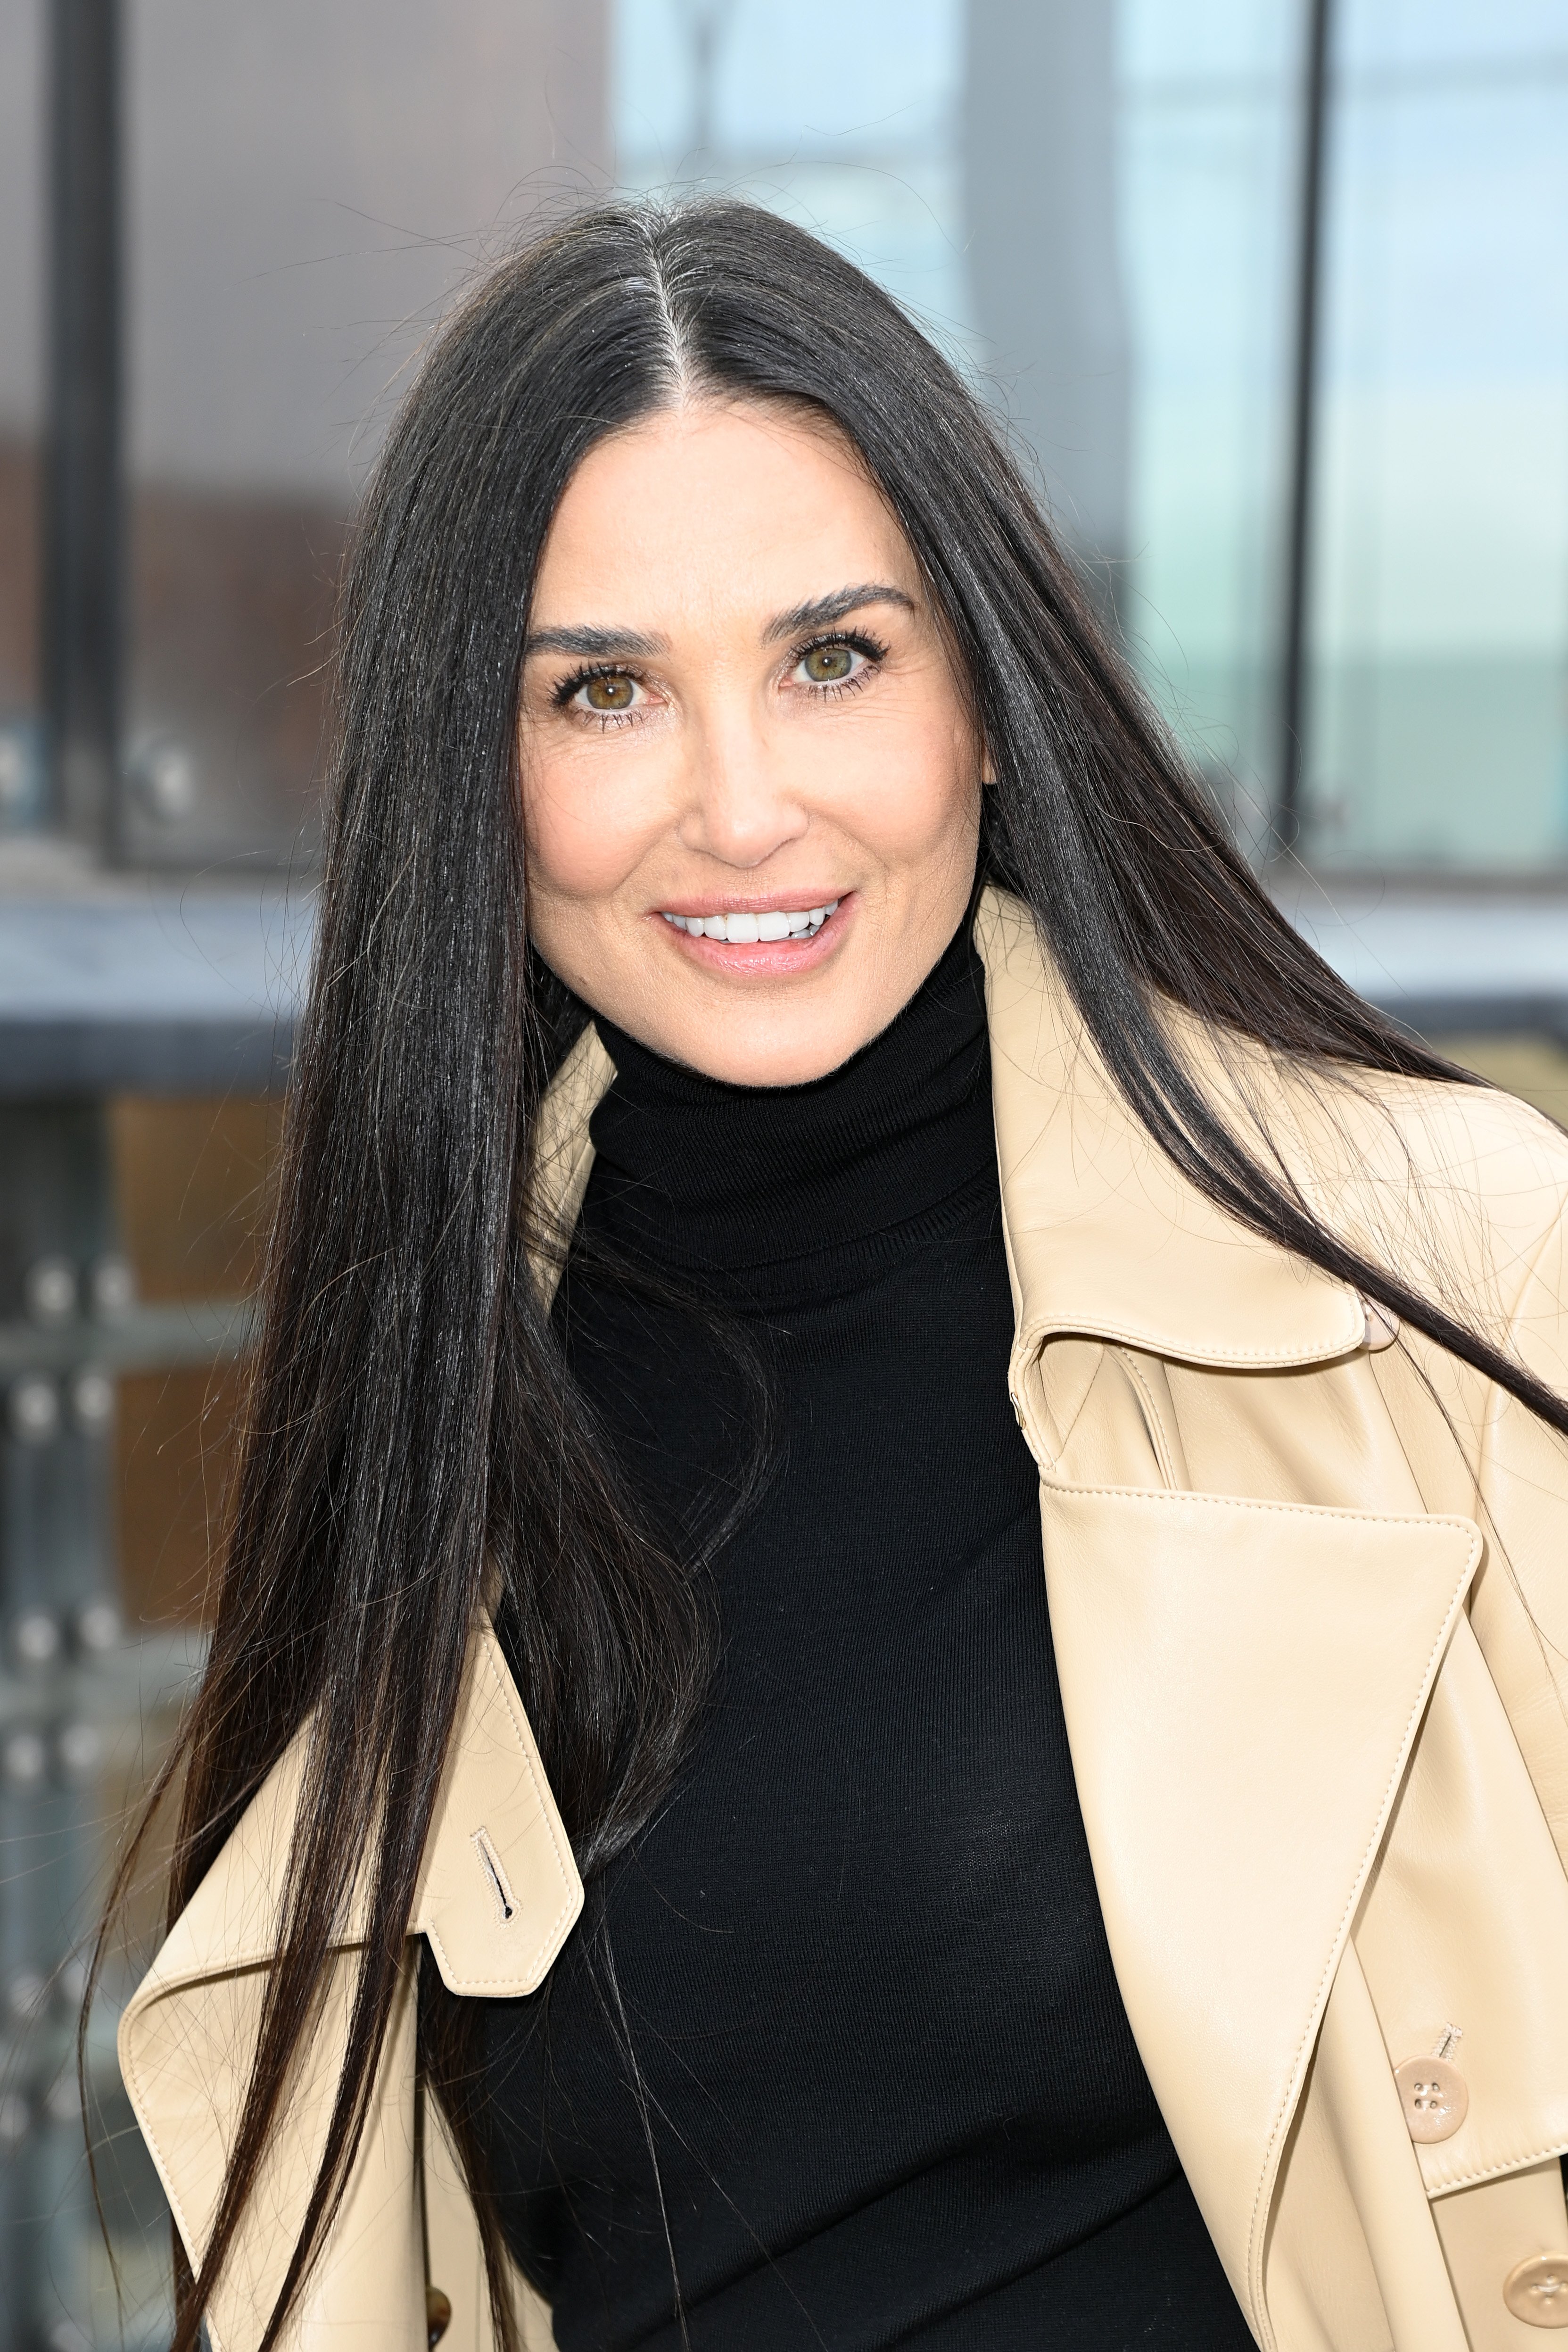  Demi Moore at the Chloe Womenswear Fall/Winter 2022/2023 on March 03, 2022 in Paris, France. | Source: Getty Images